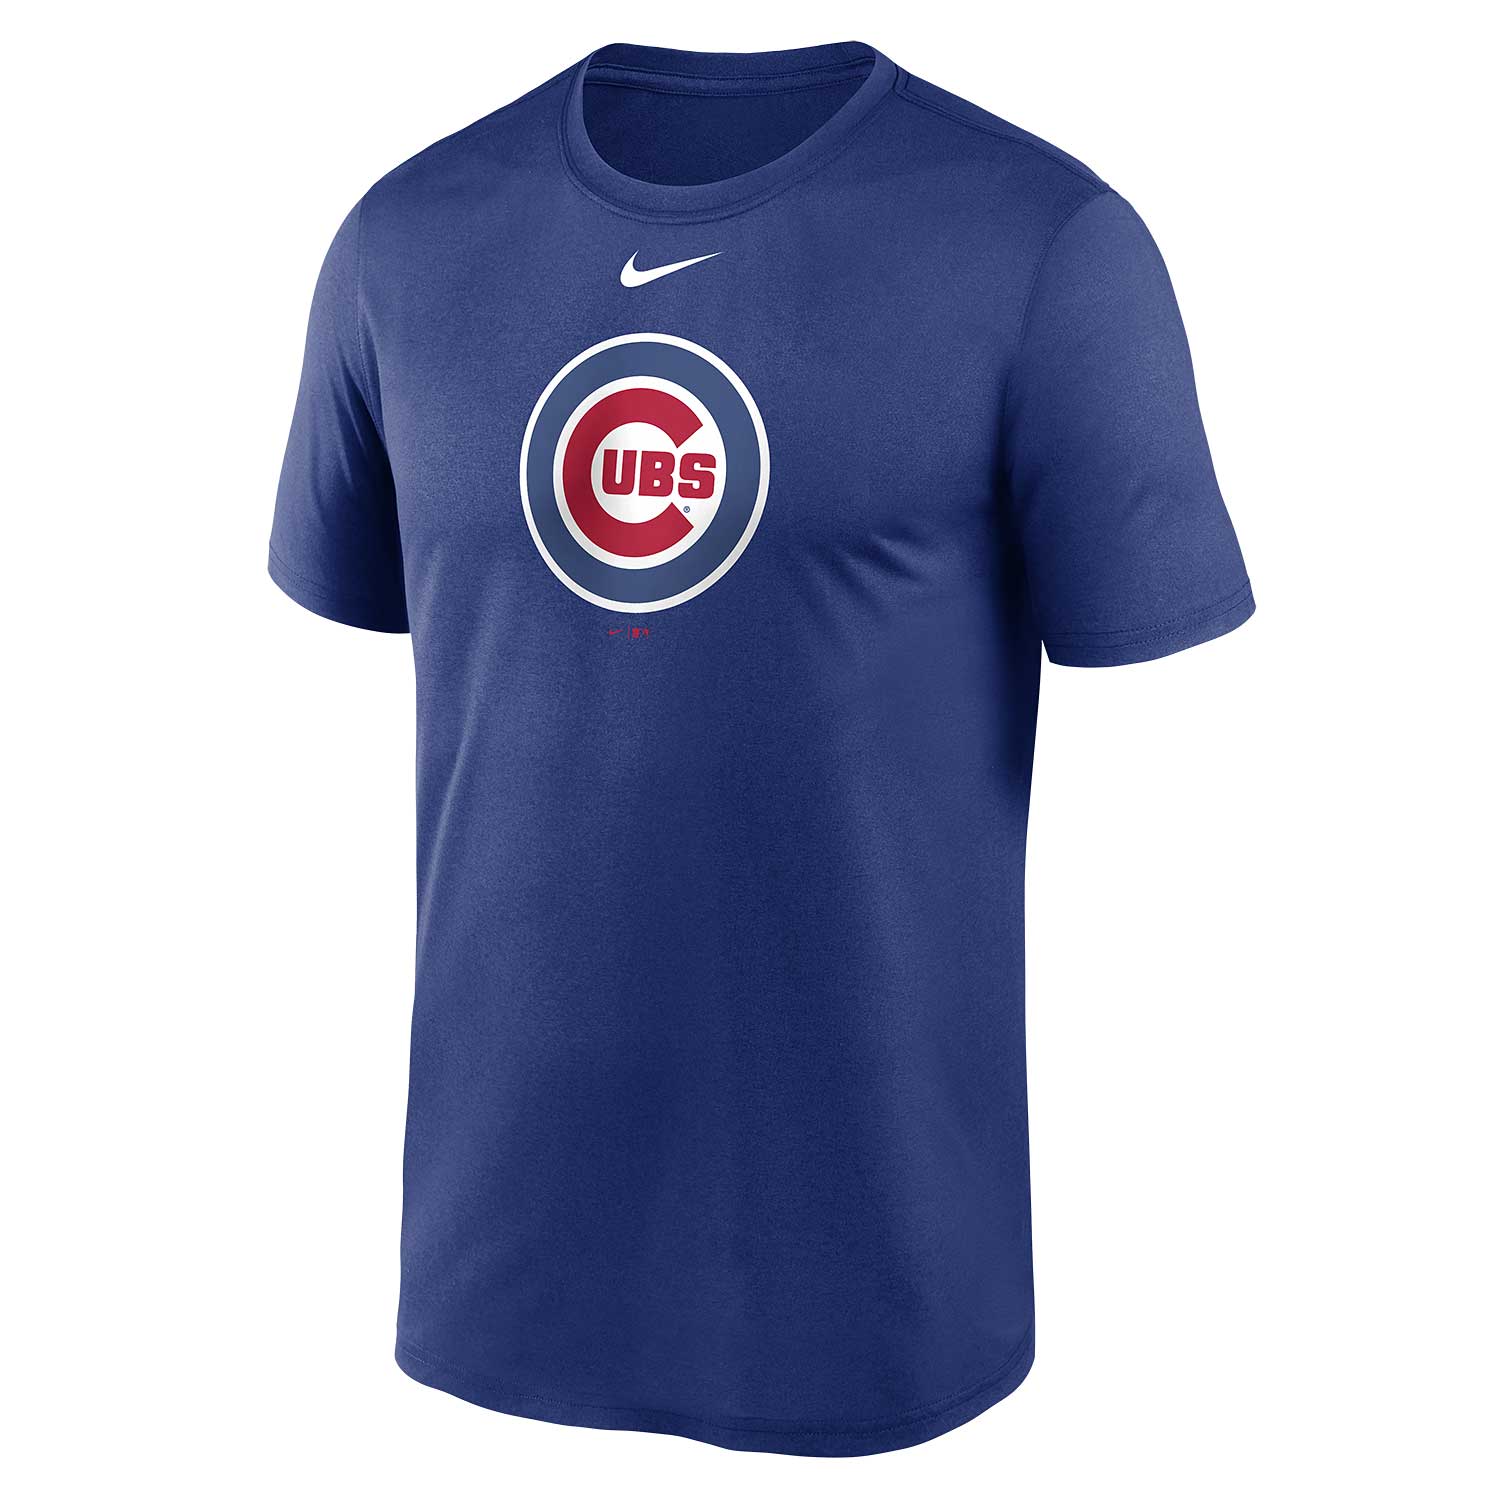 Men's Nike Royal Chicago Cubs New Legend Logo T-Shirt Size: Small